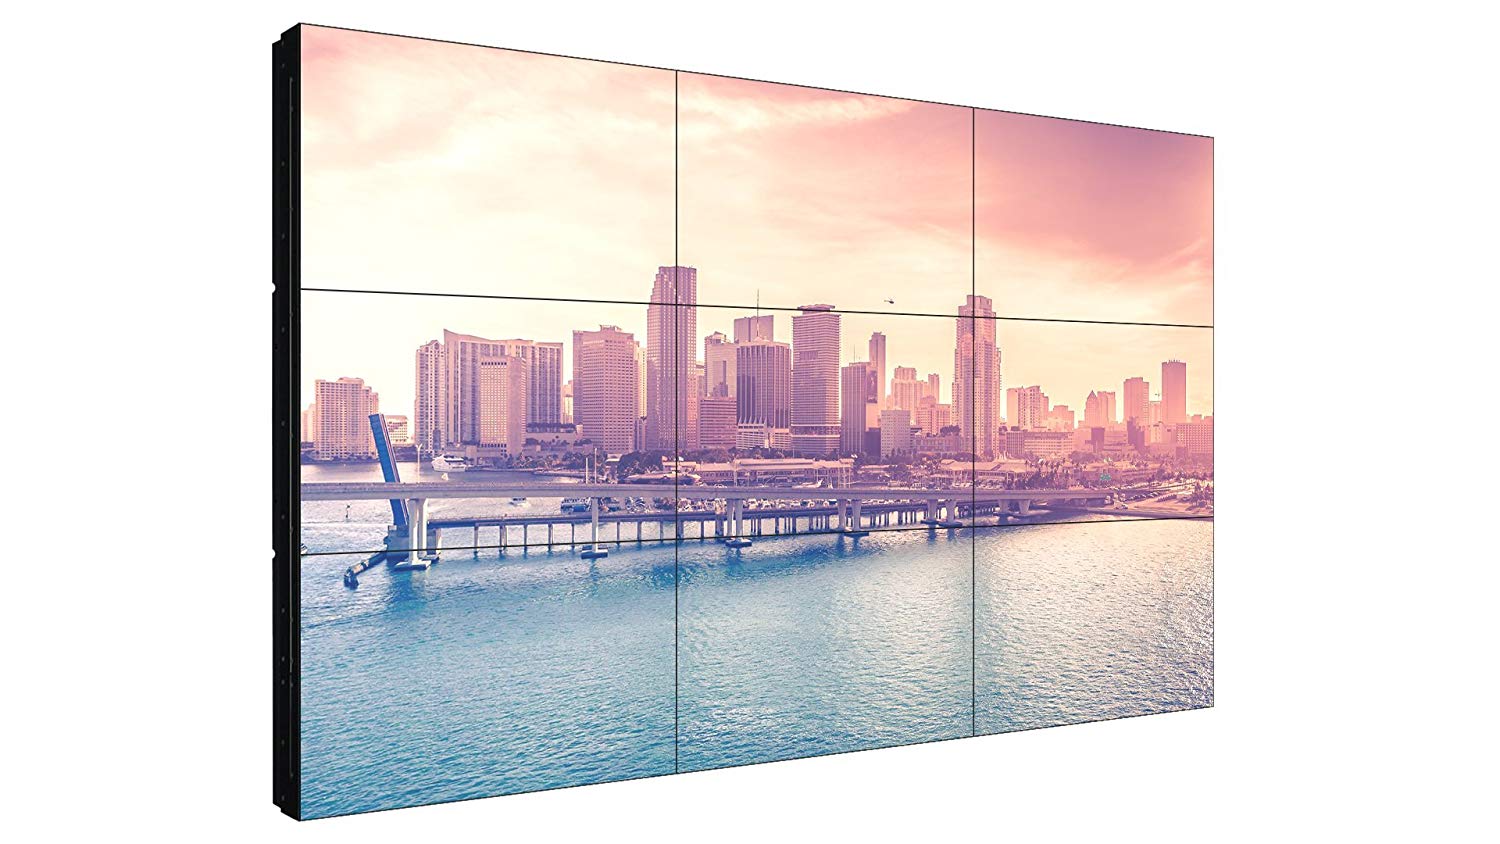 Starview Video Wall 3x3x55 (Price: $17,225)